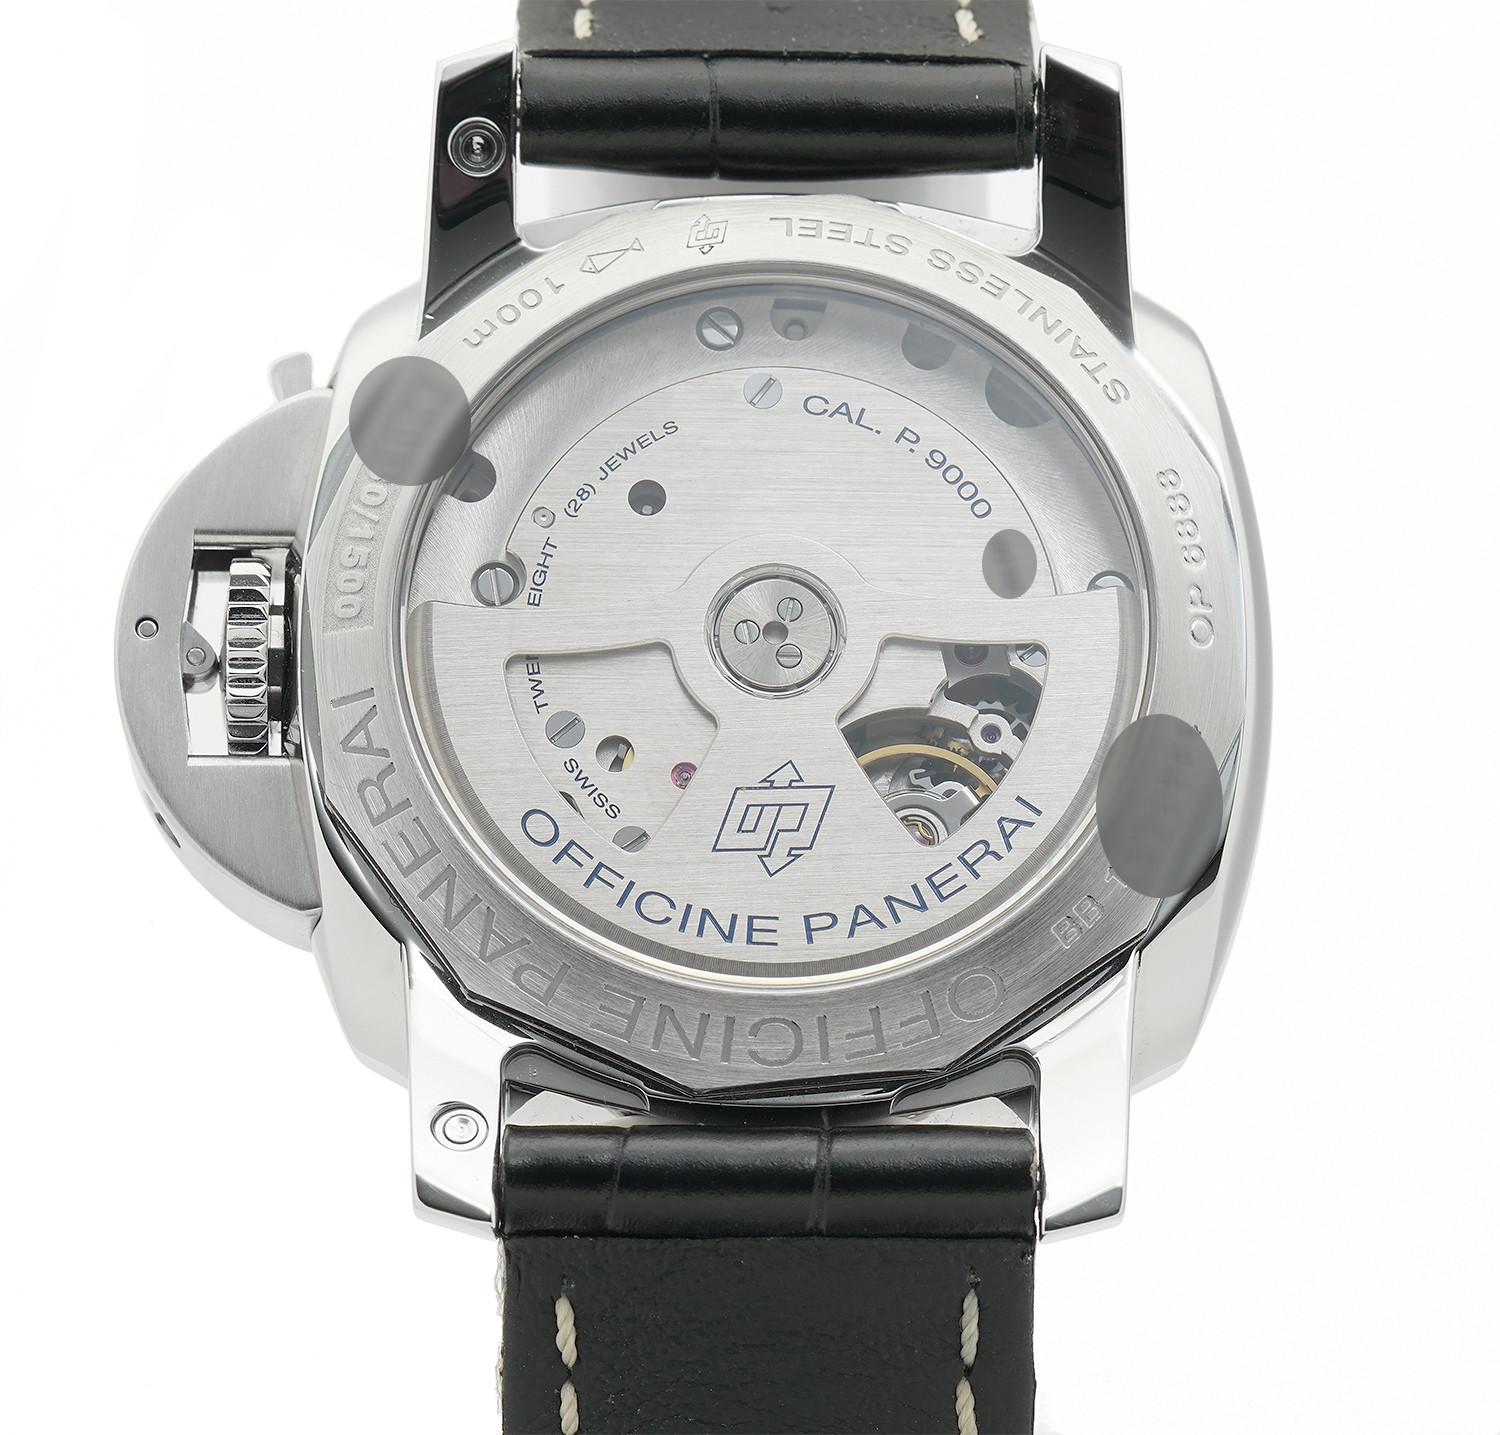 Contemporary Panerai Luminor 1950 PAM00523, White Dial, Certified and Warranty